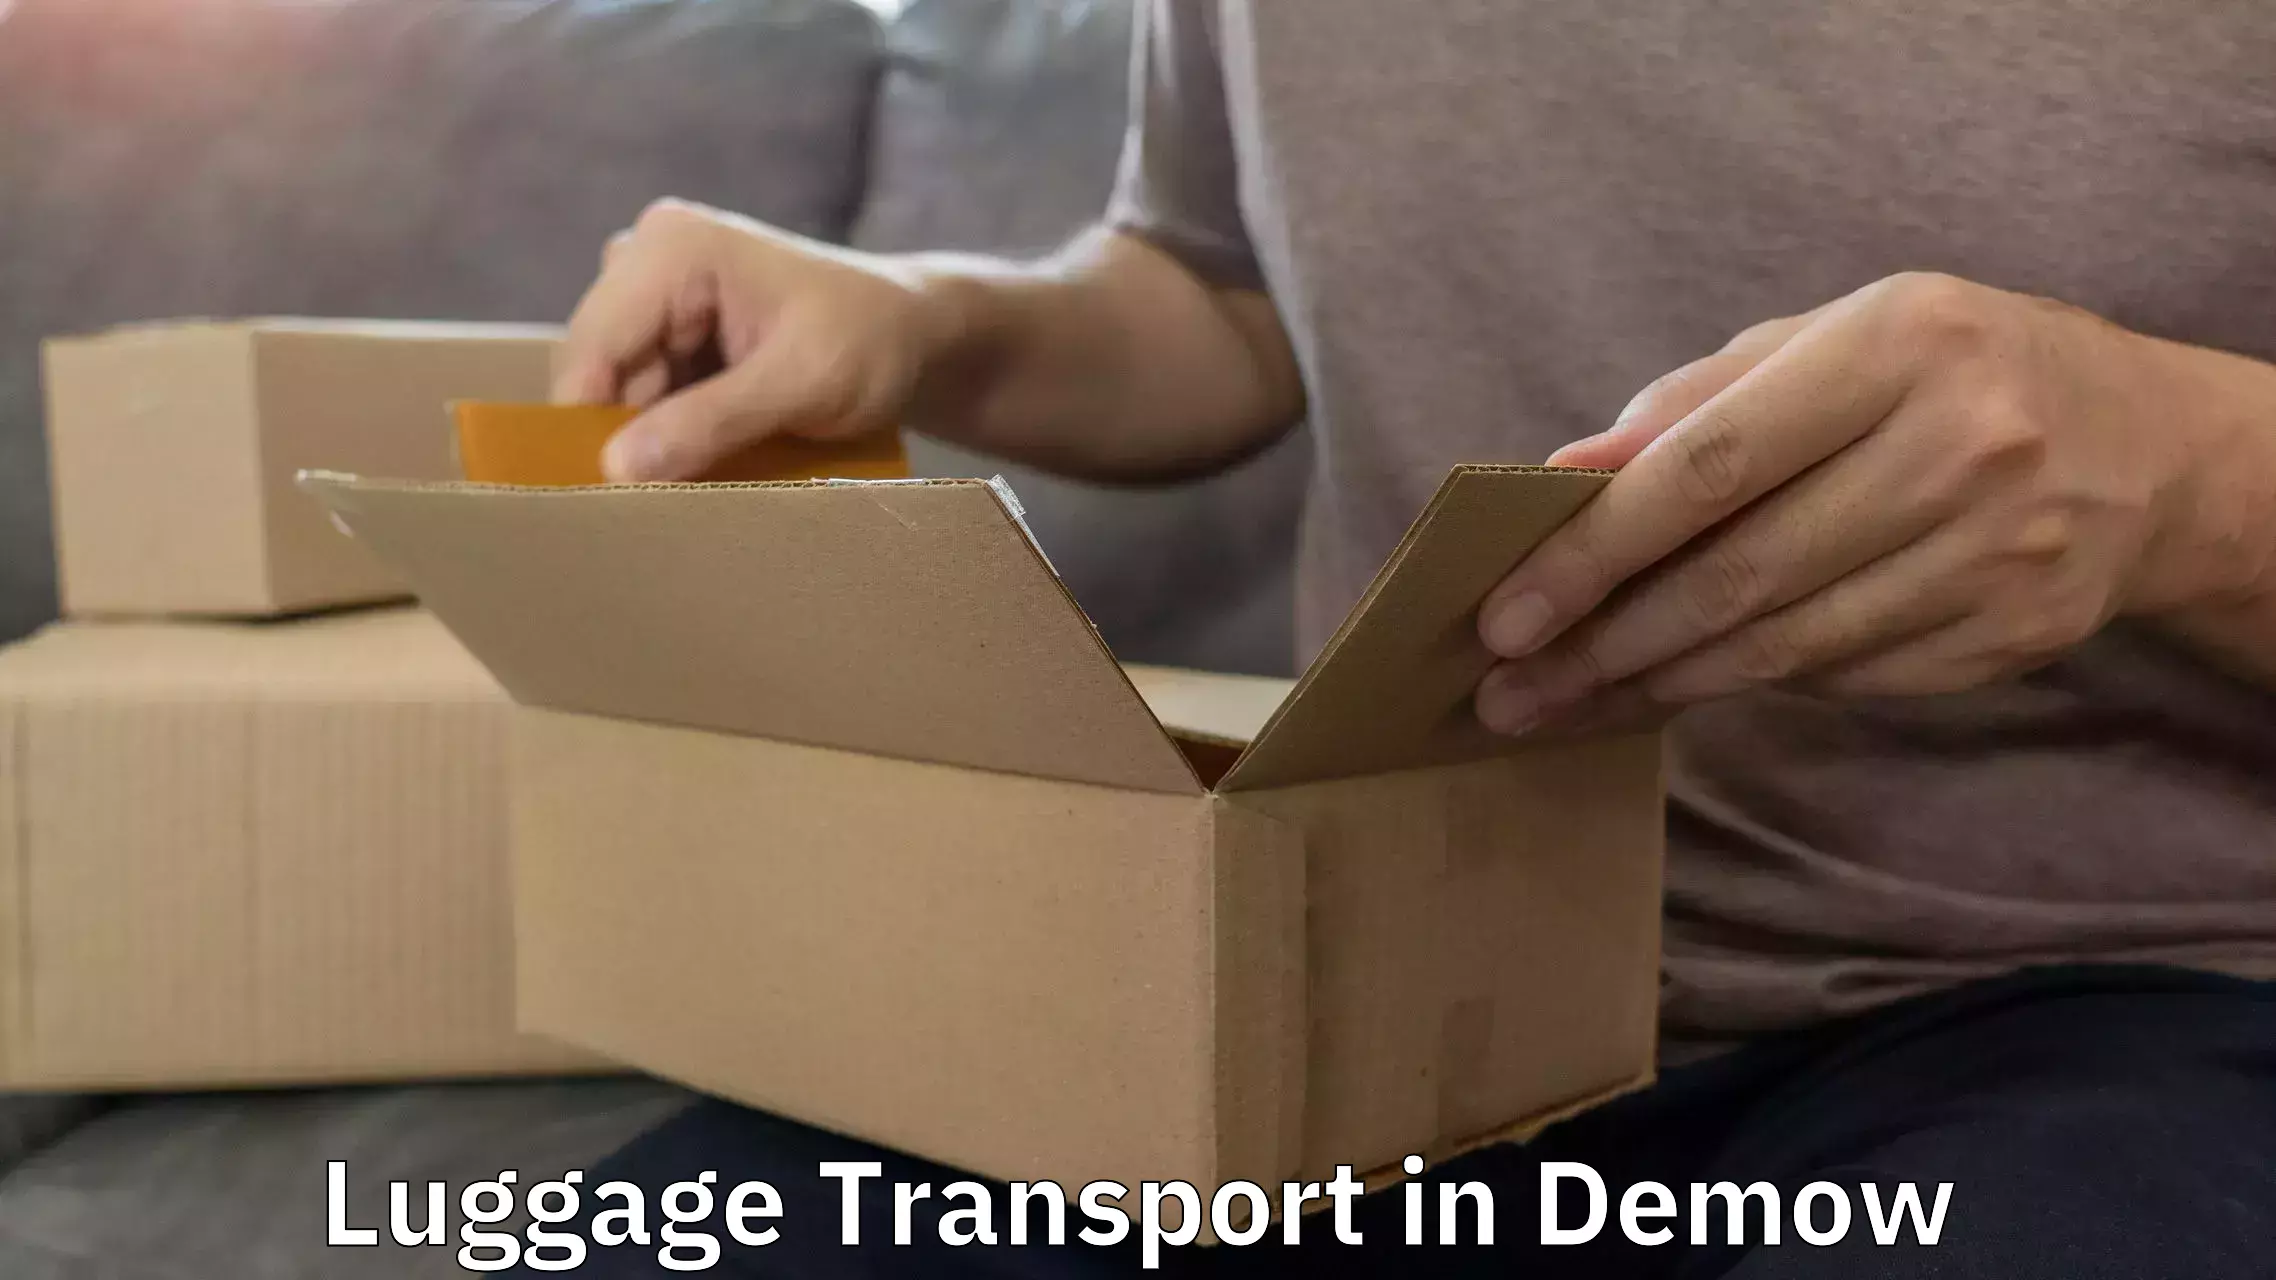 Baggage relocation service in Demow